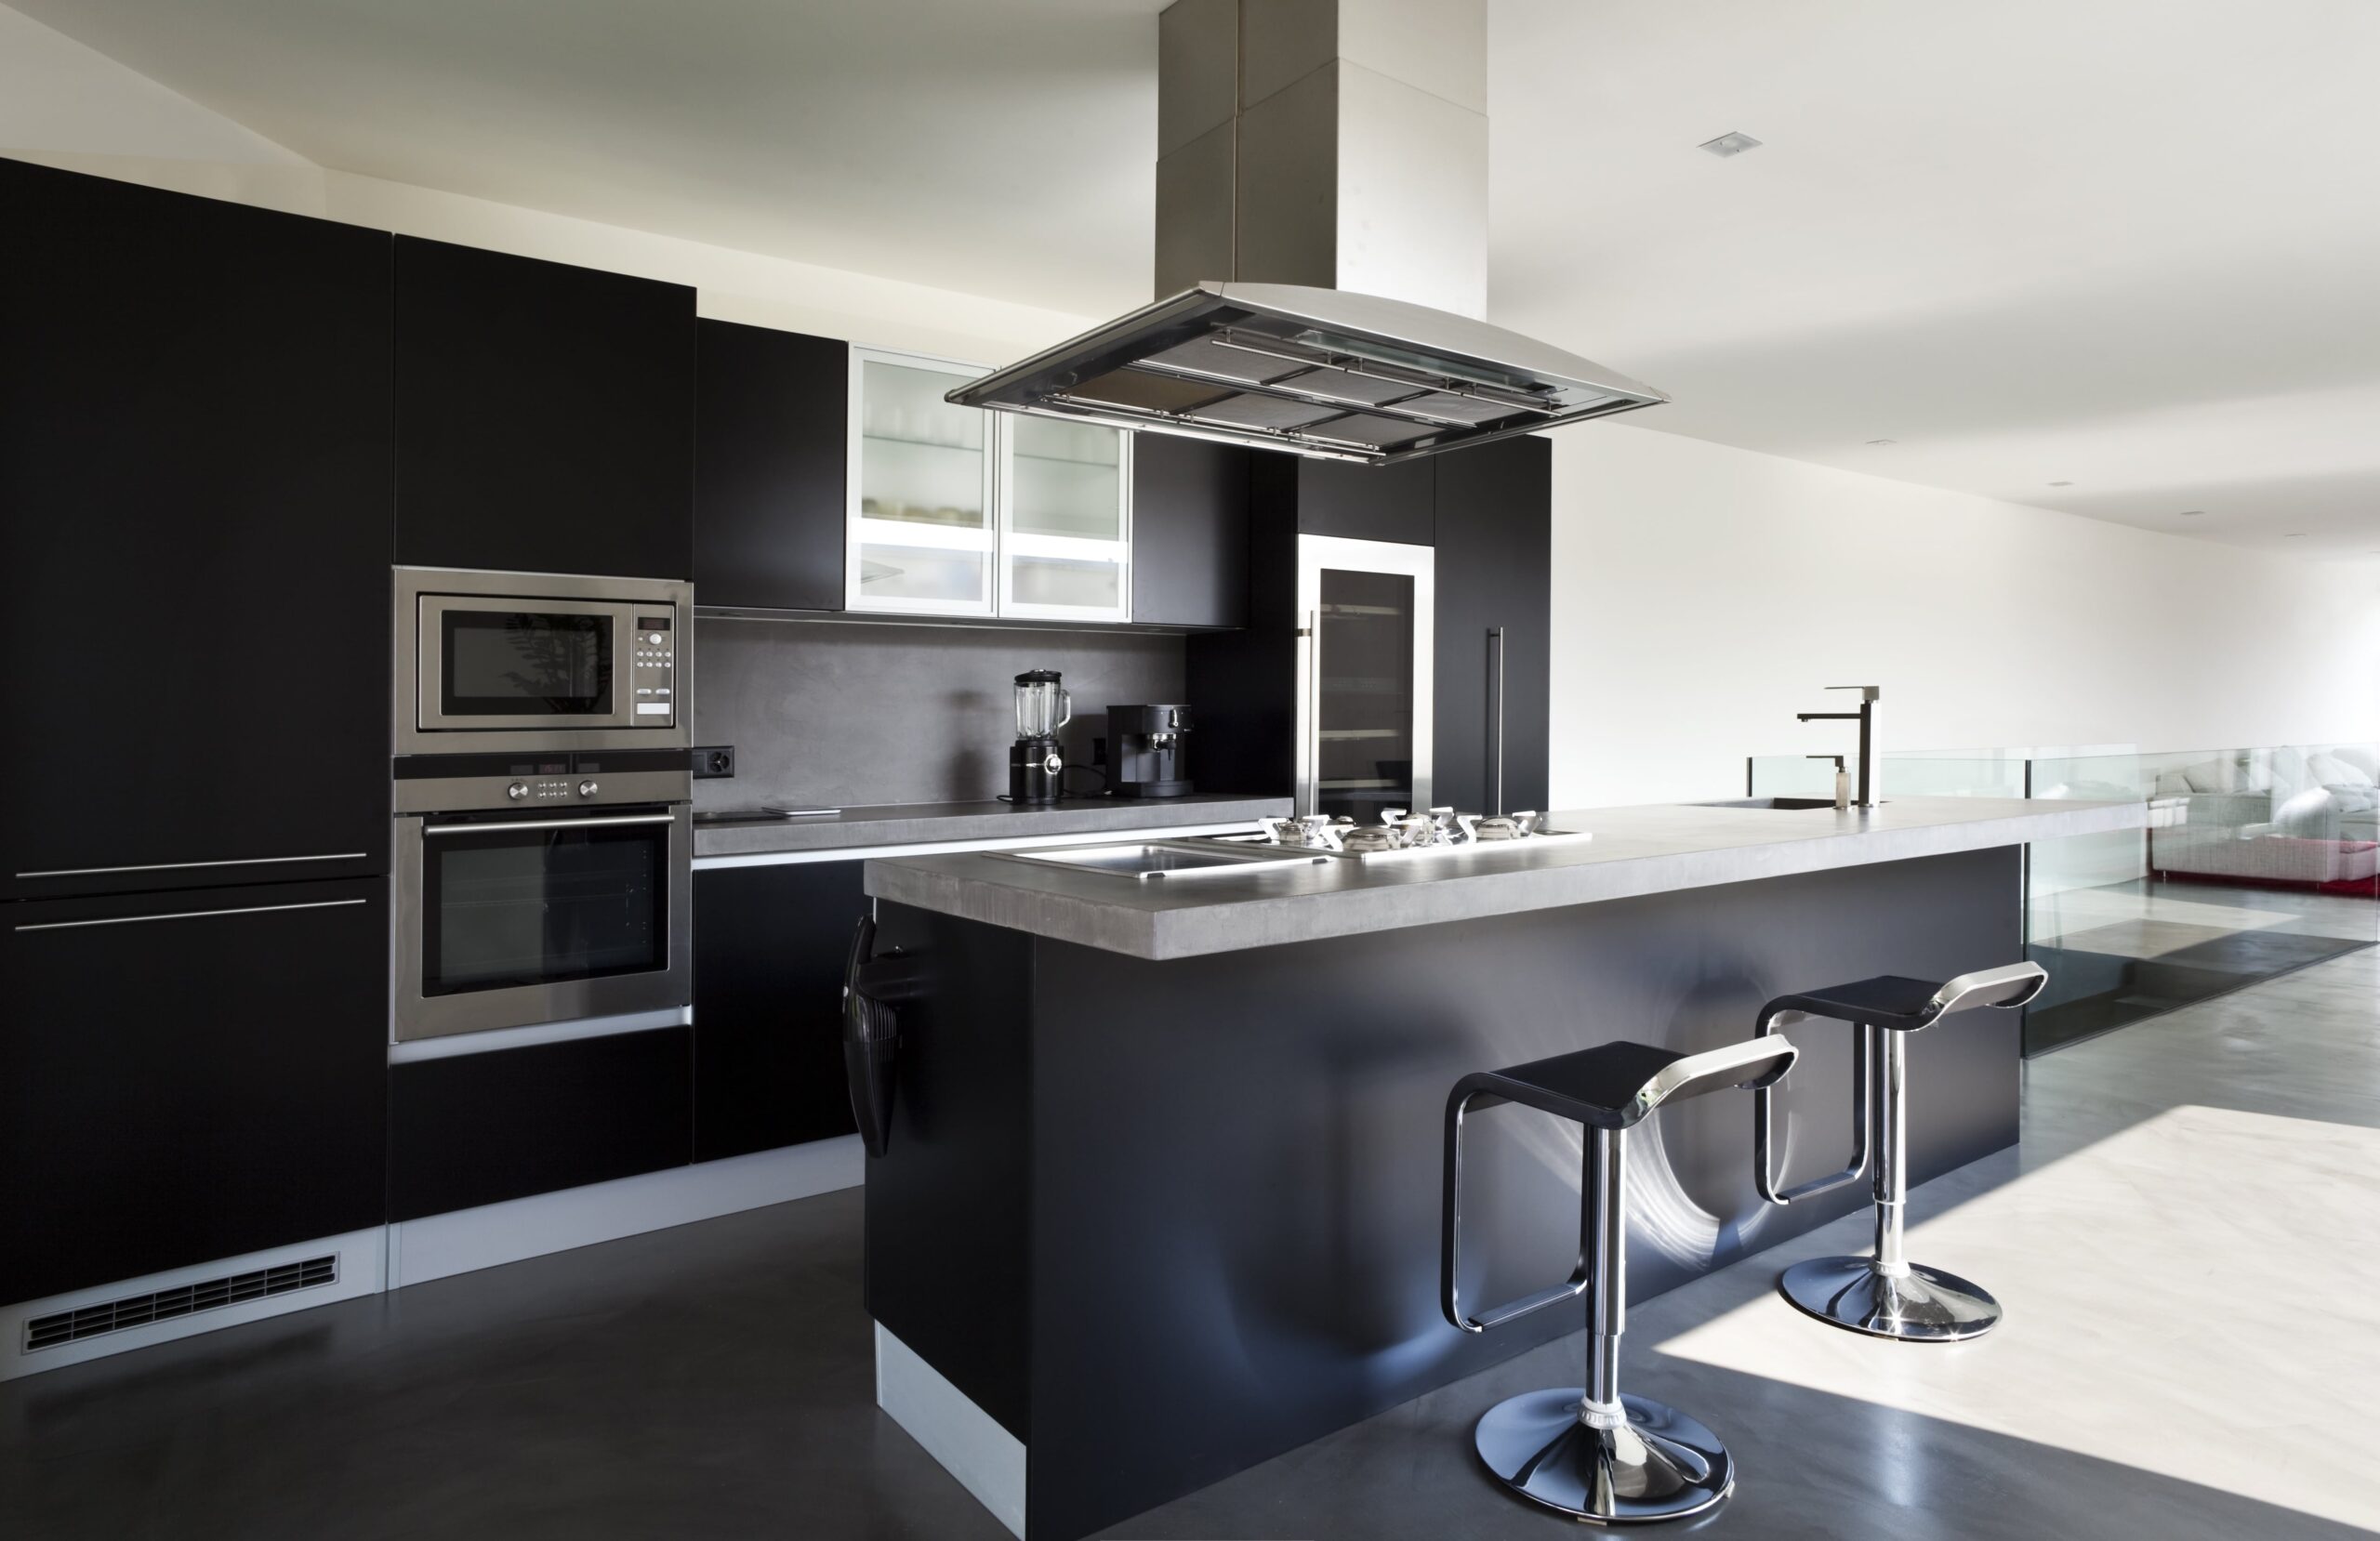 A Modern kitchen design idea with black cabinets and stainless steel appliances.